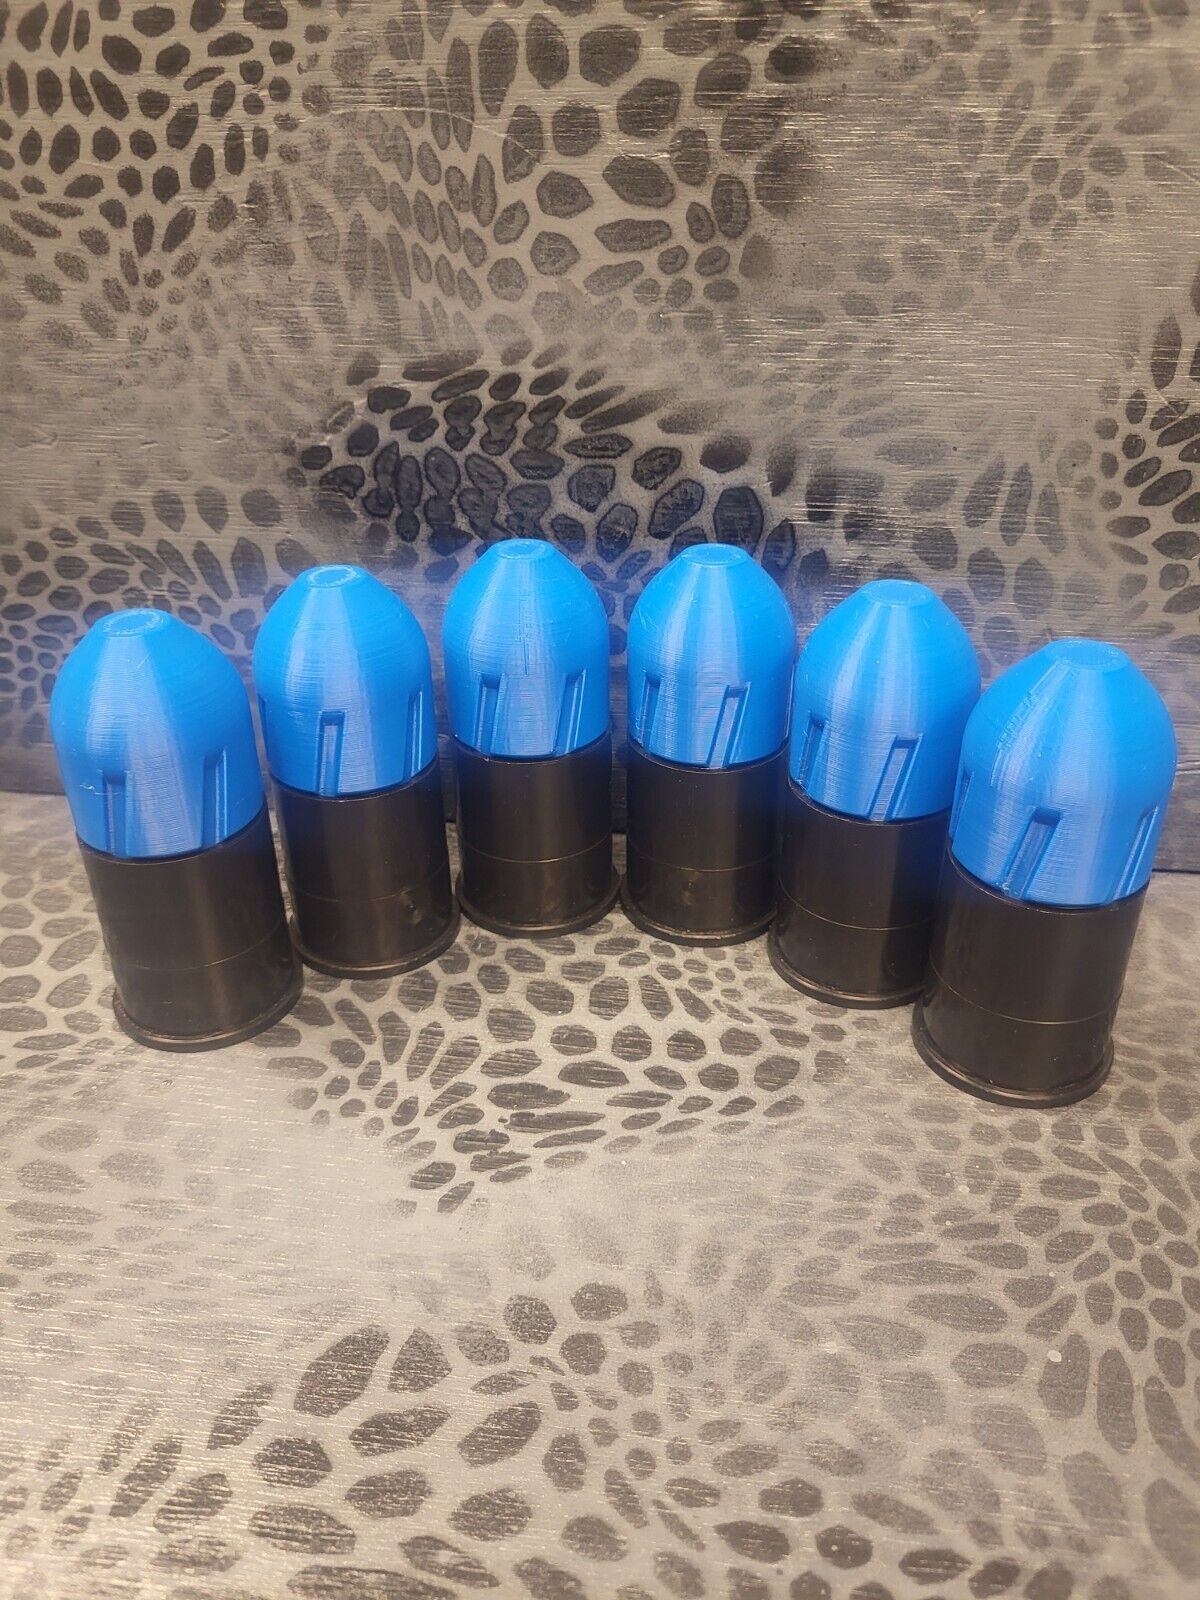 37mm training projectile complete kit. 6 pack blue